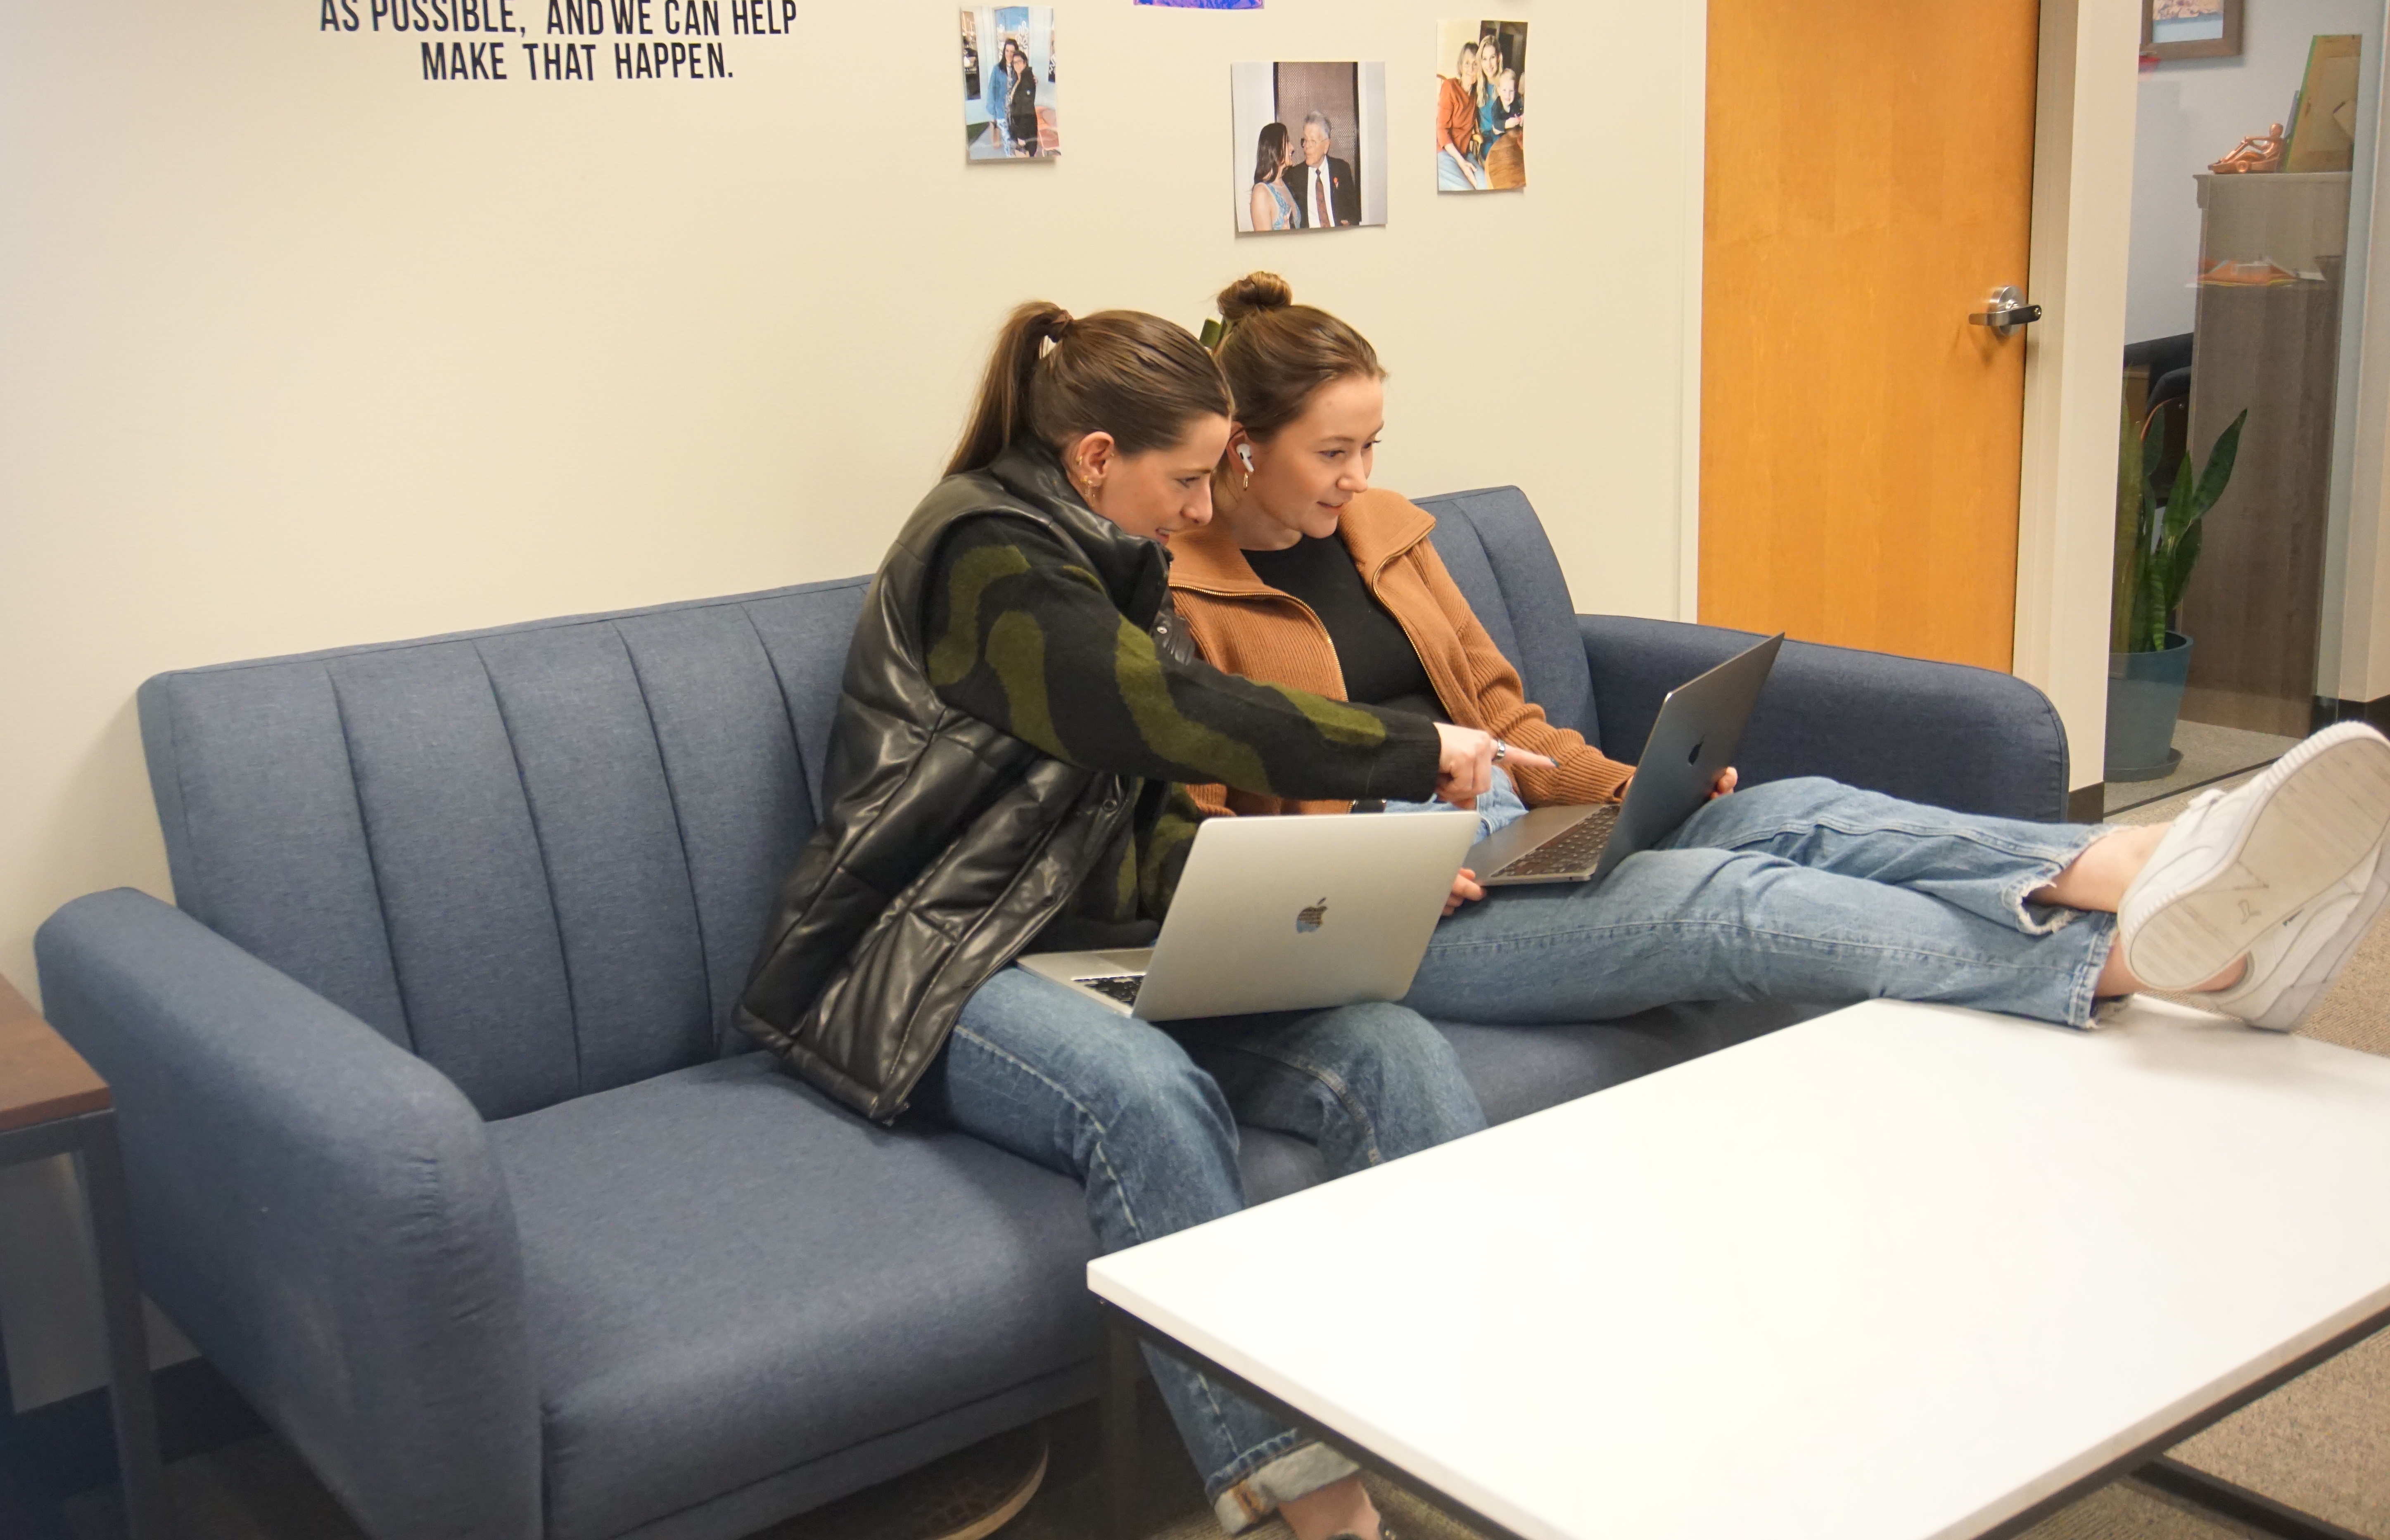 Two Nymbl Science co-workers sit on a couch, one with feet up, looking at a laptop